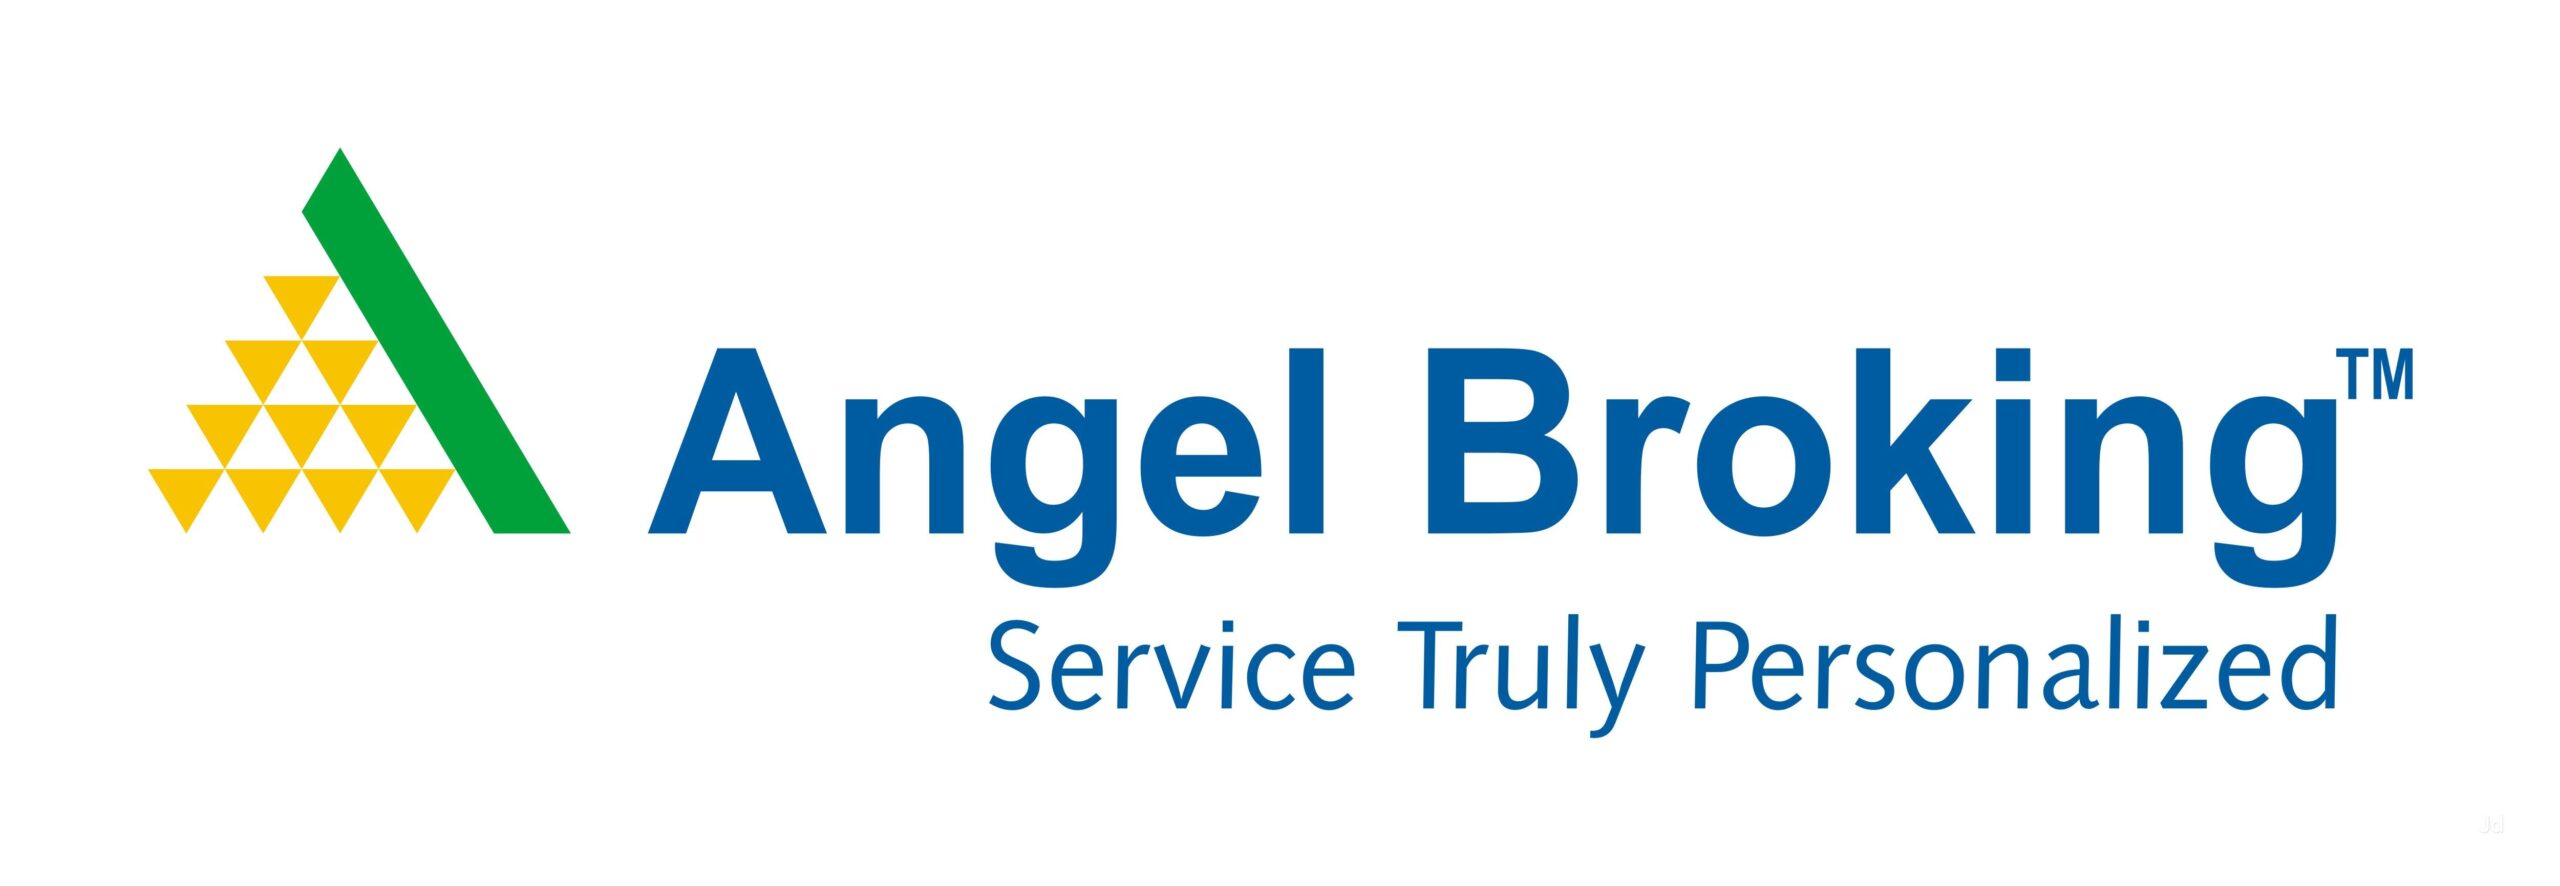 Angel Broking Rebrands to Angel One, to Cater to All Financial Needs of Its Millennials